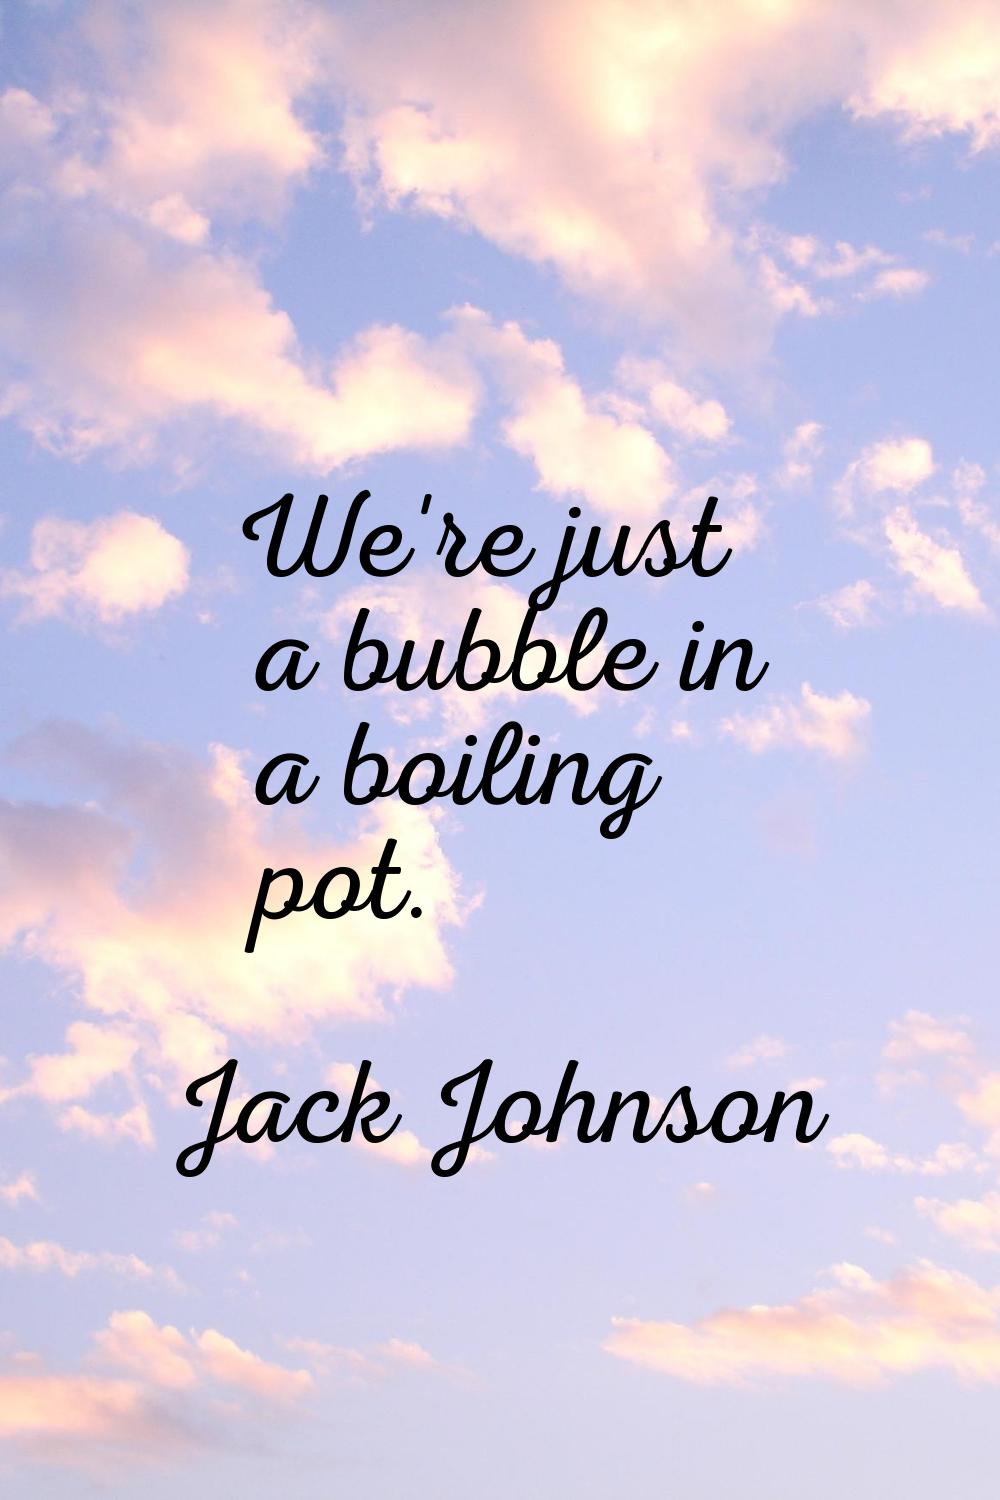 We're just a bubble in a boiling pot.